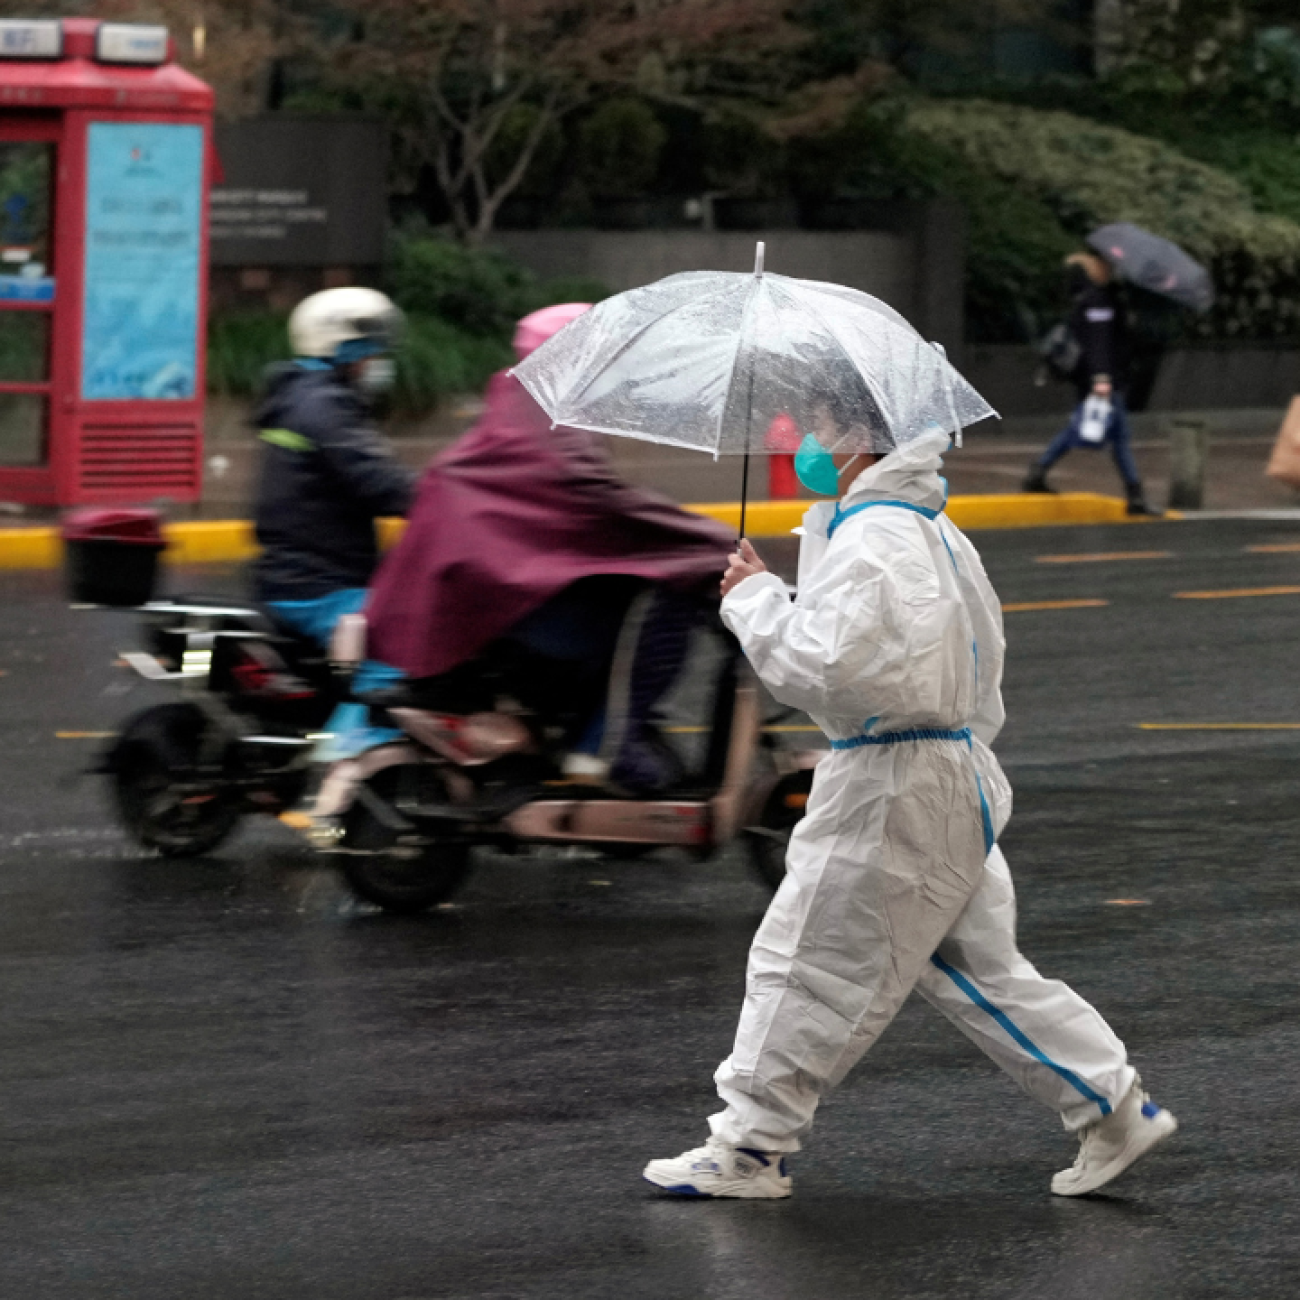 a worker in white protective suit holding an umbrella crosses a road in the rain during a COVID-19 outbreak in Shanghai, China, on November 30, 2022.